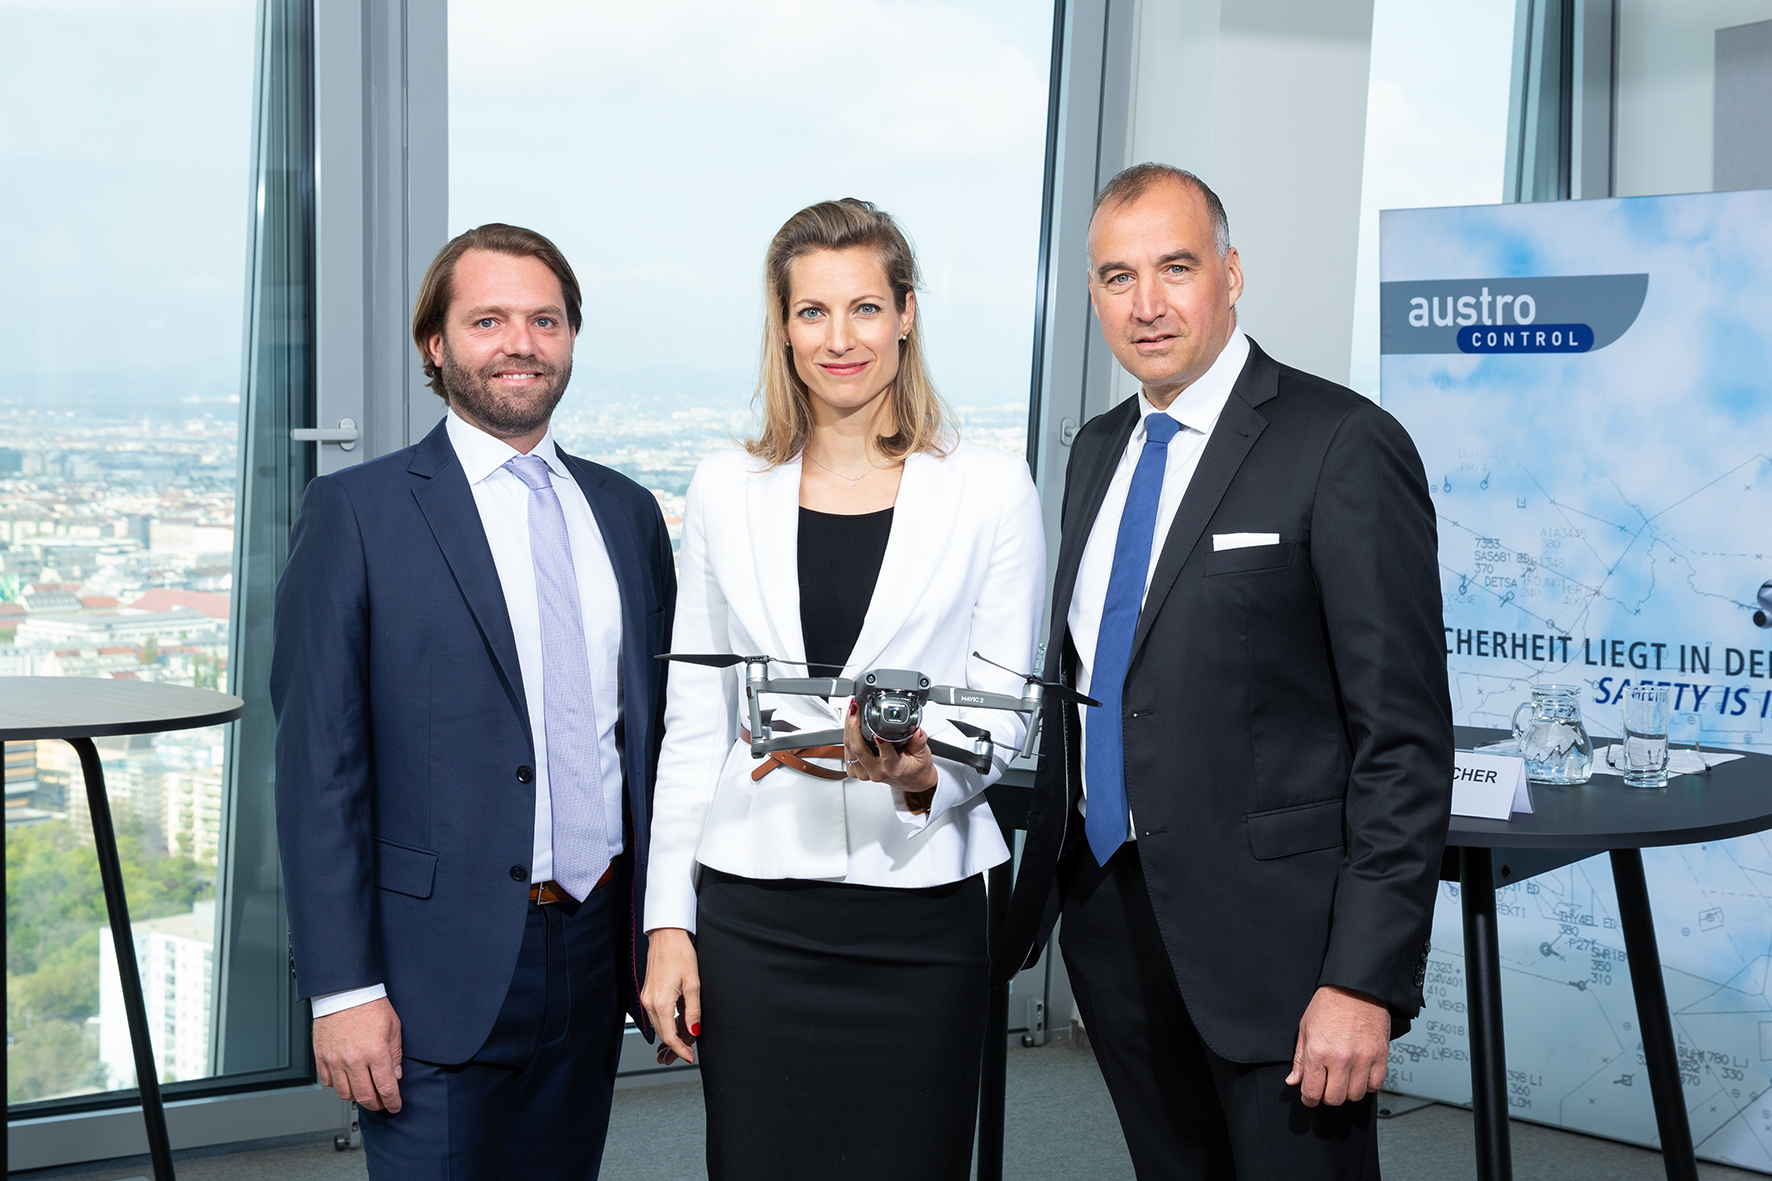 Frequentis strengthens cooperation with Austro Control to enable safe flying with drones